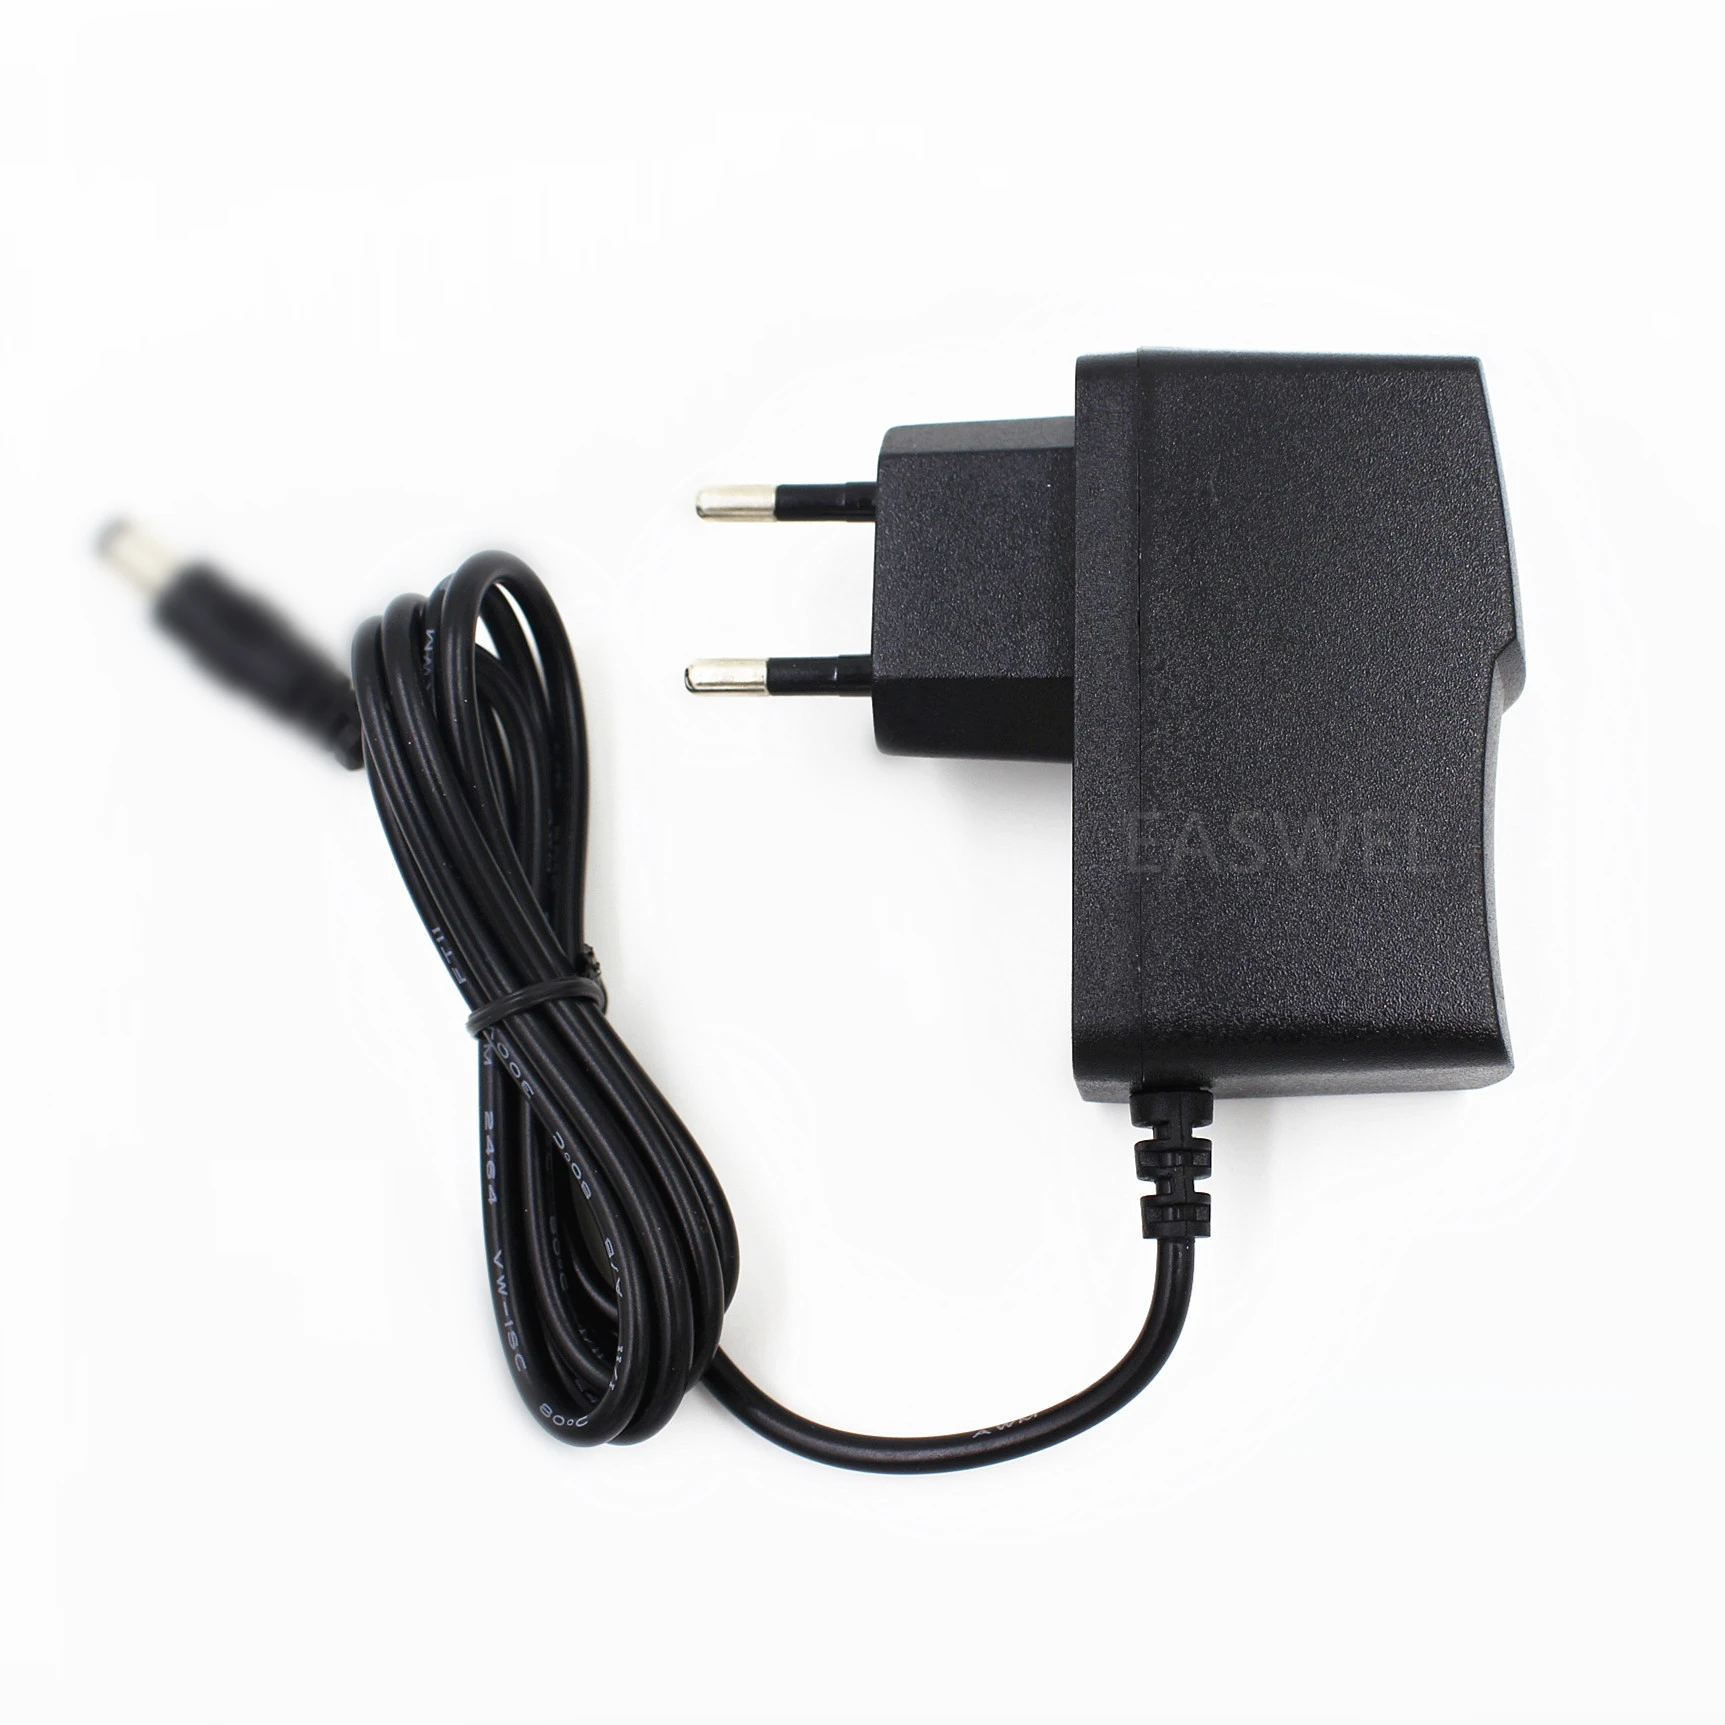 stoeprand banaan plaats 9V AC DC Power Supply Adapter Wall Charger For Kettler CYD 0900500E|AC/DC  Adapters| - AliExpress